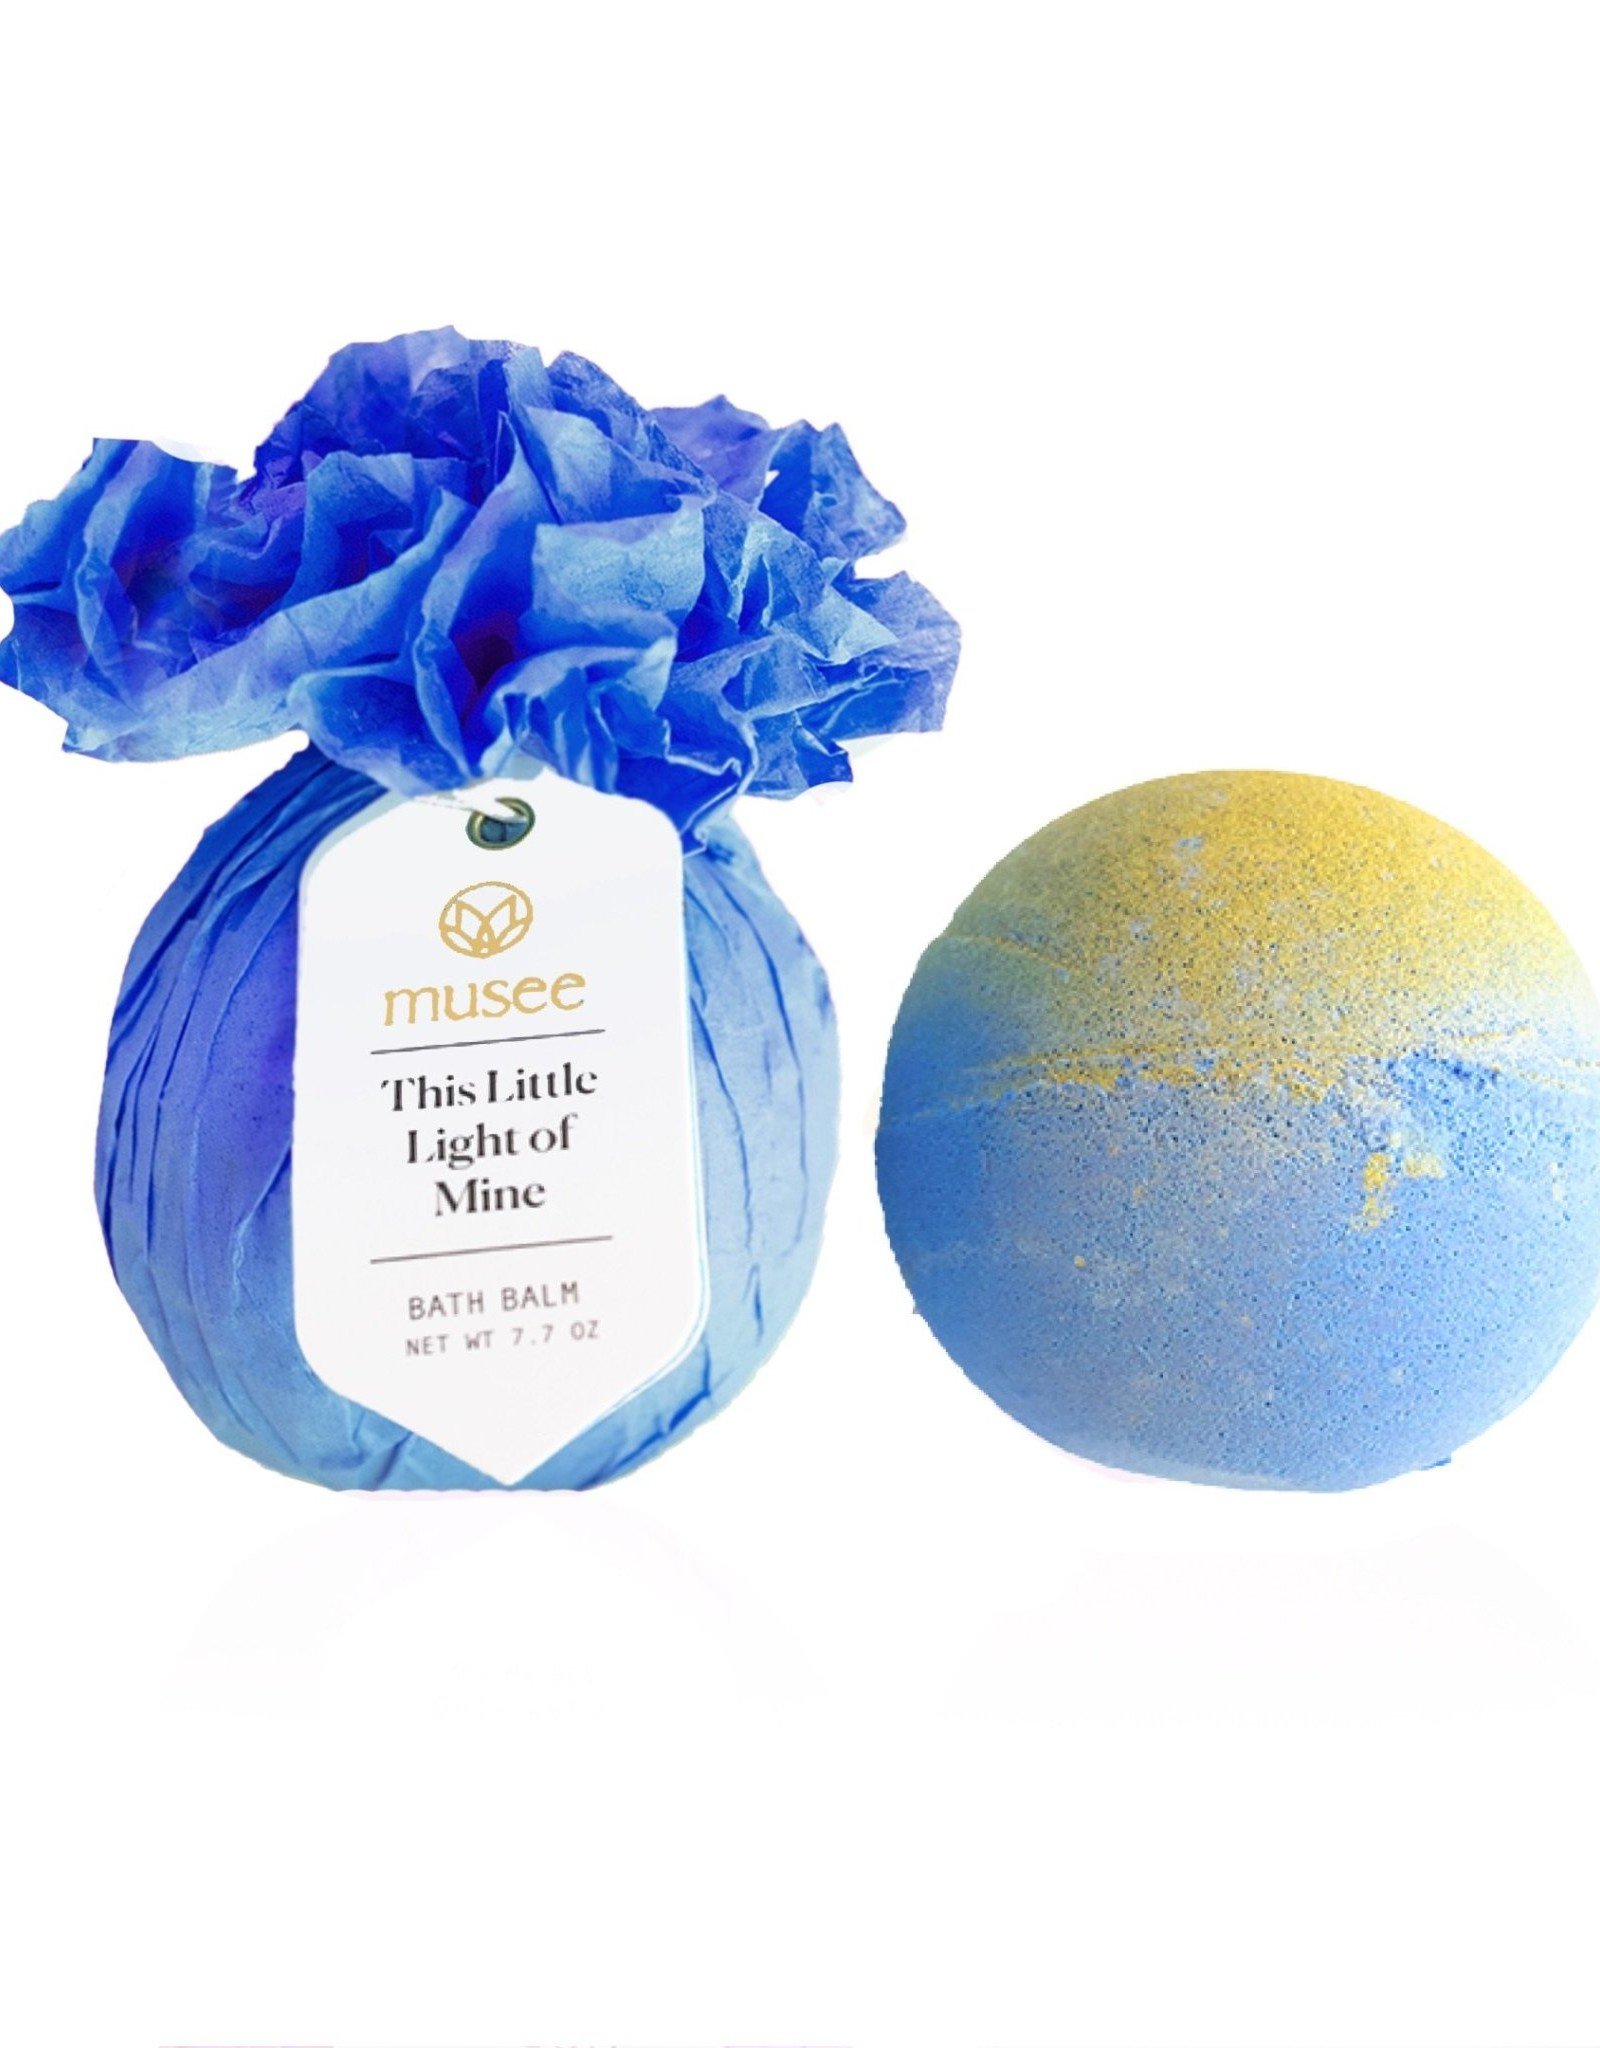 Musee Bath Bomb - This Little Light of Mine